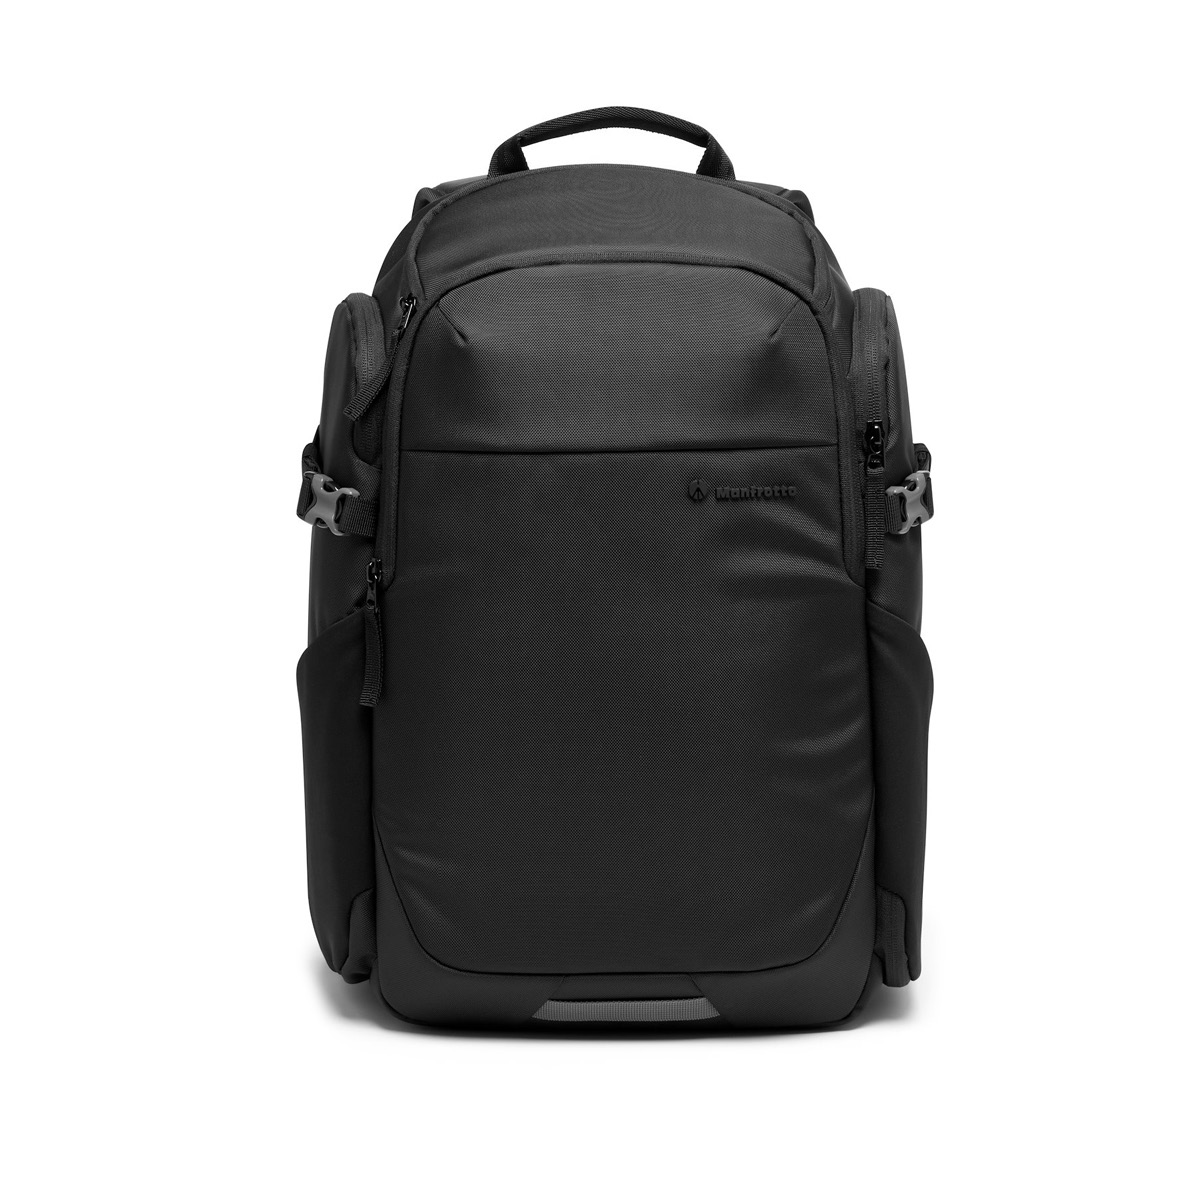 Manfrotto Advanced 3 Rucksack Befree